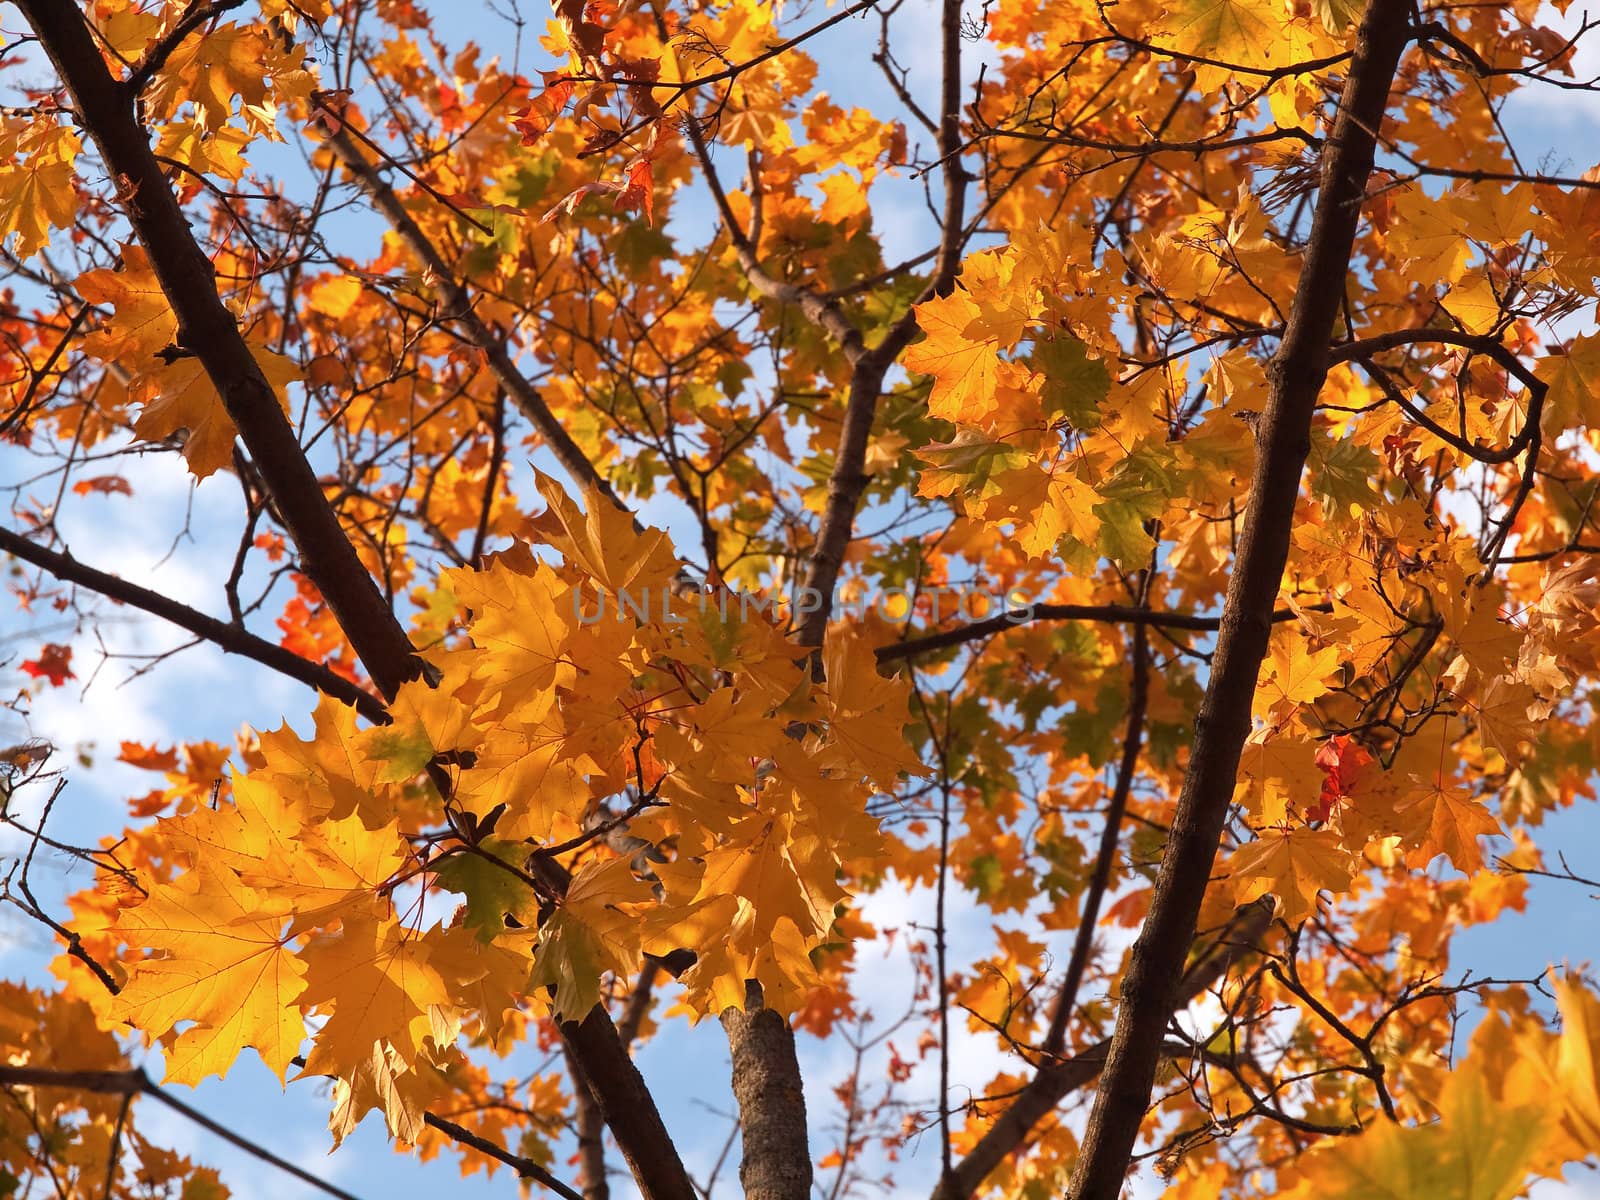 Colorful maple leaves on the tree with blue sky by kvinoz